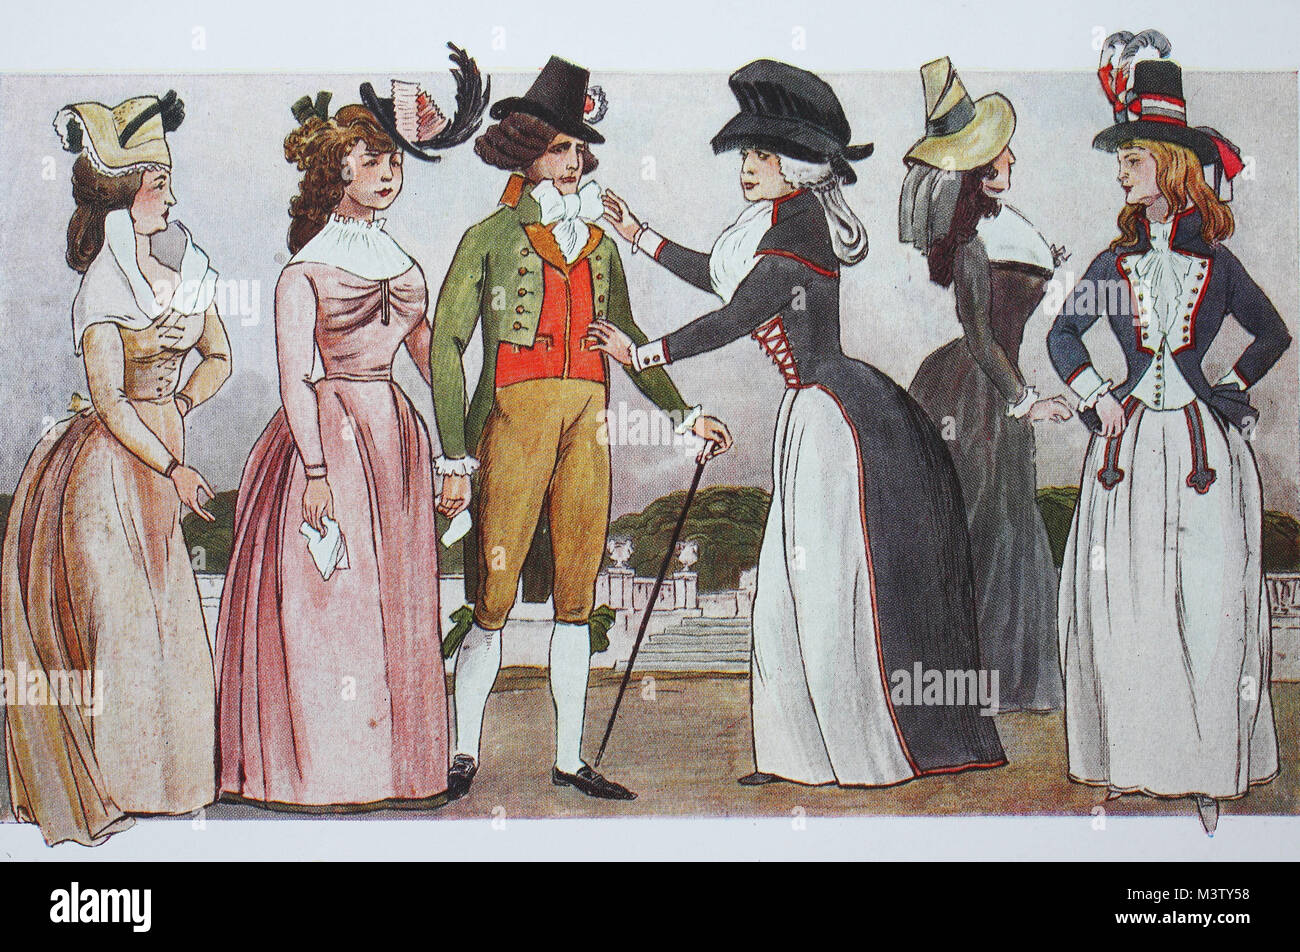 Fashion, clothing, France, Paris costumes at the time of the Revolution  around 1790, from the left, Lady of 1791, Lady of July 1792, gentleman in  open suit and round hat of 1791,